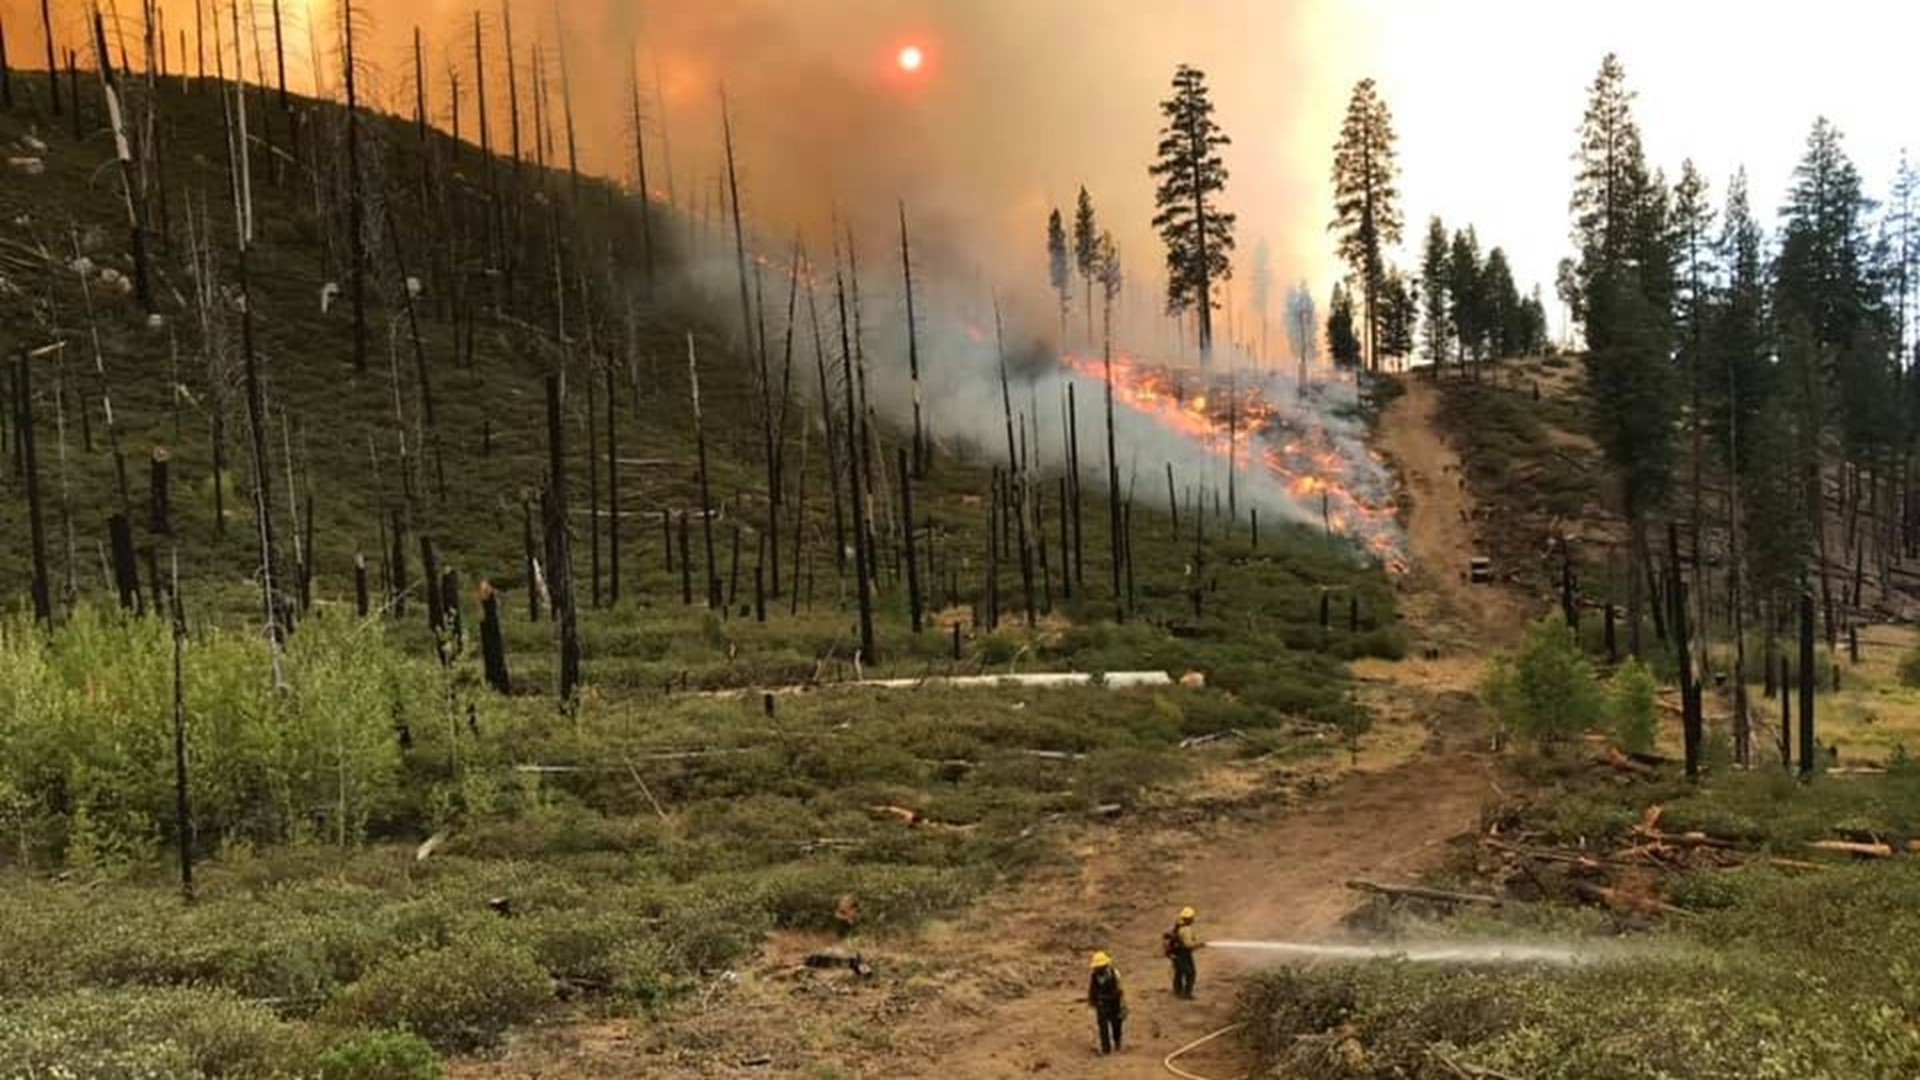 The Walker Fire, burning in Plumas County, has grown to 54,518 acres, according to the U.S. Forest Service. Steve Kliest, with the U.S. Forest Service, said crews will focus on making sure the fire stays within containment lines.